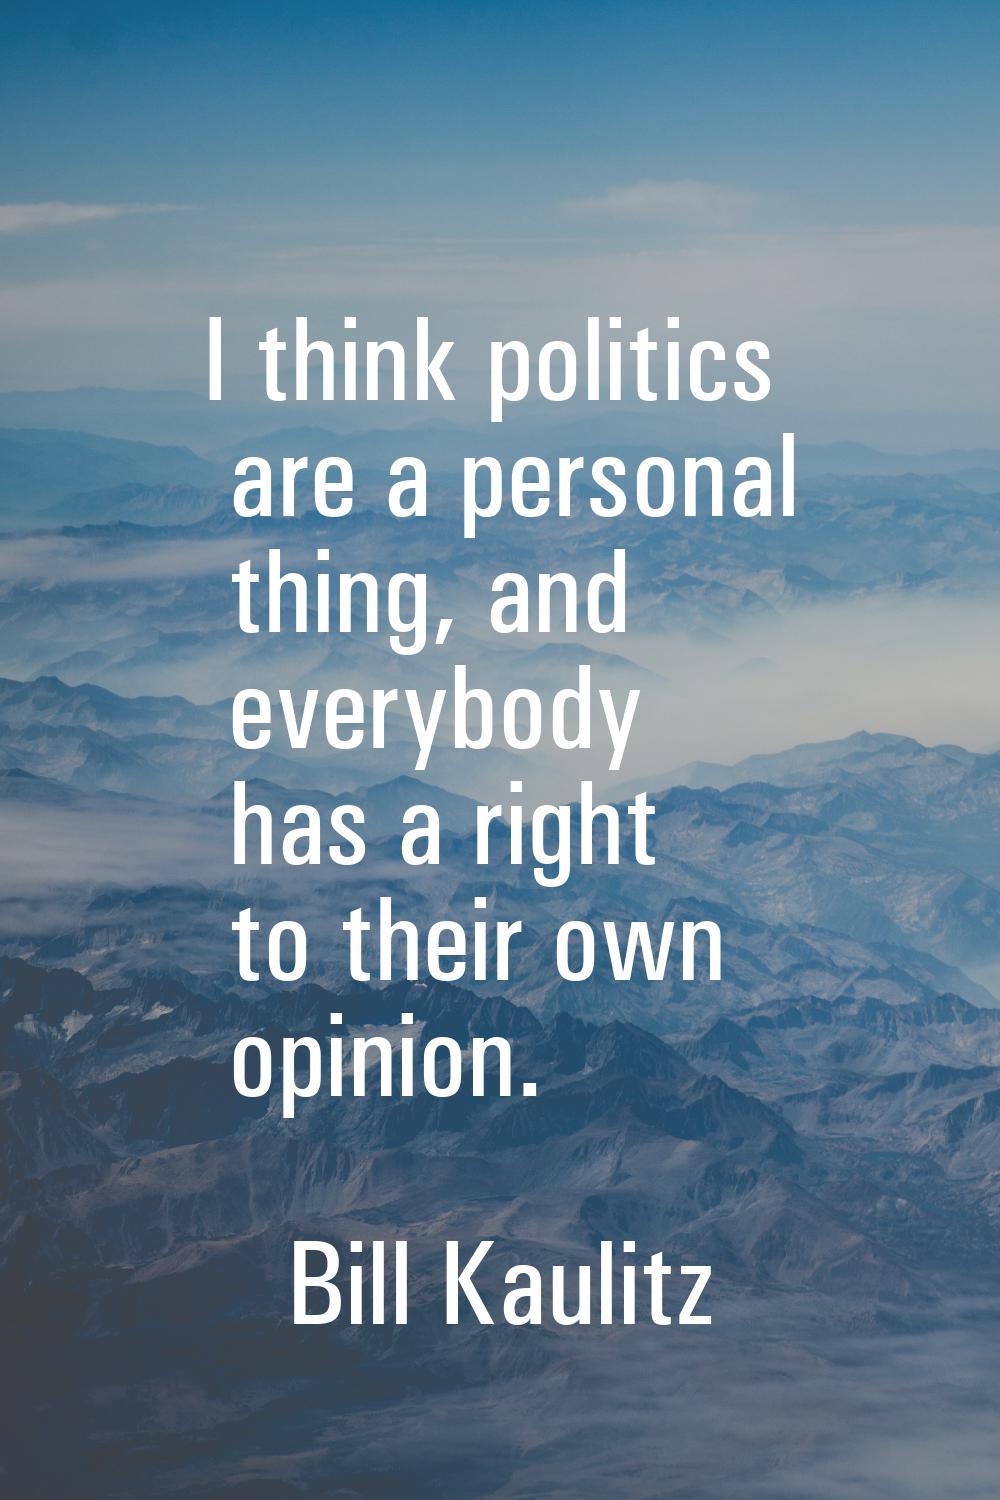 I think politics are a personal thing, and everybody has a right to their own opinion.